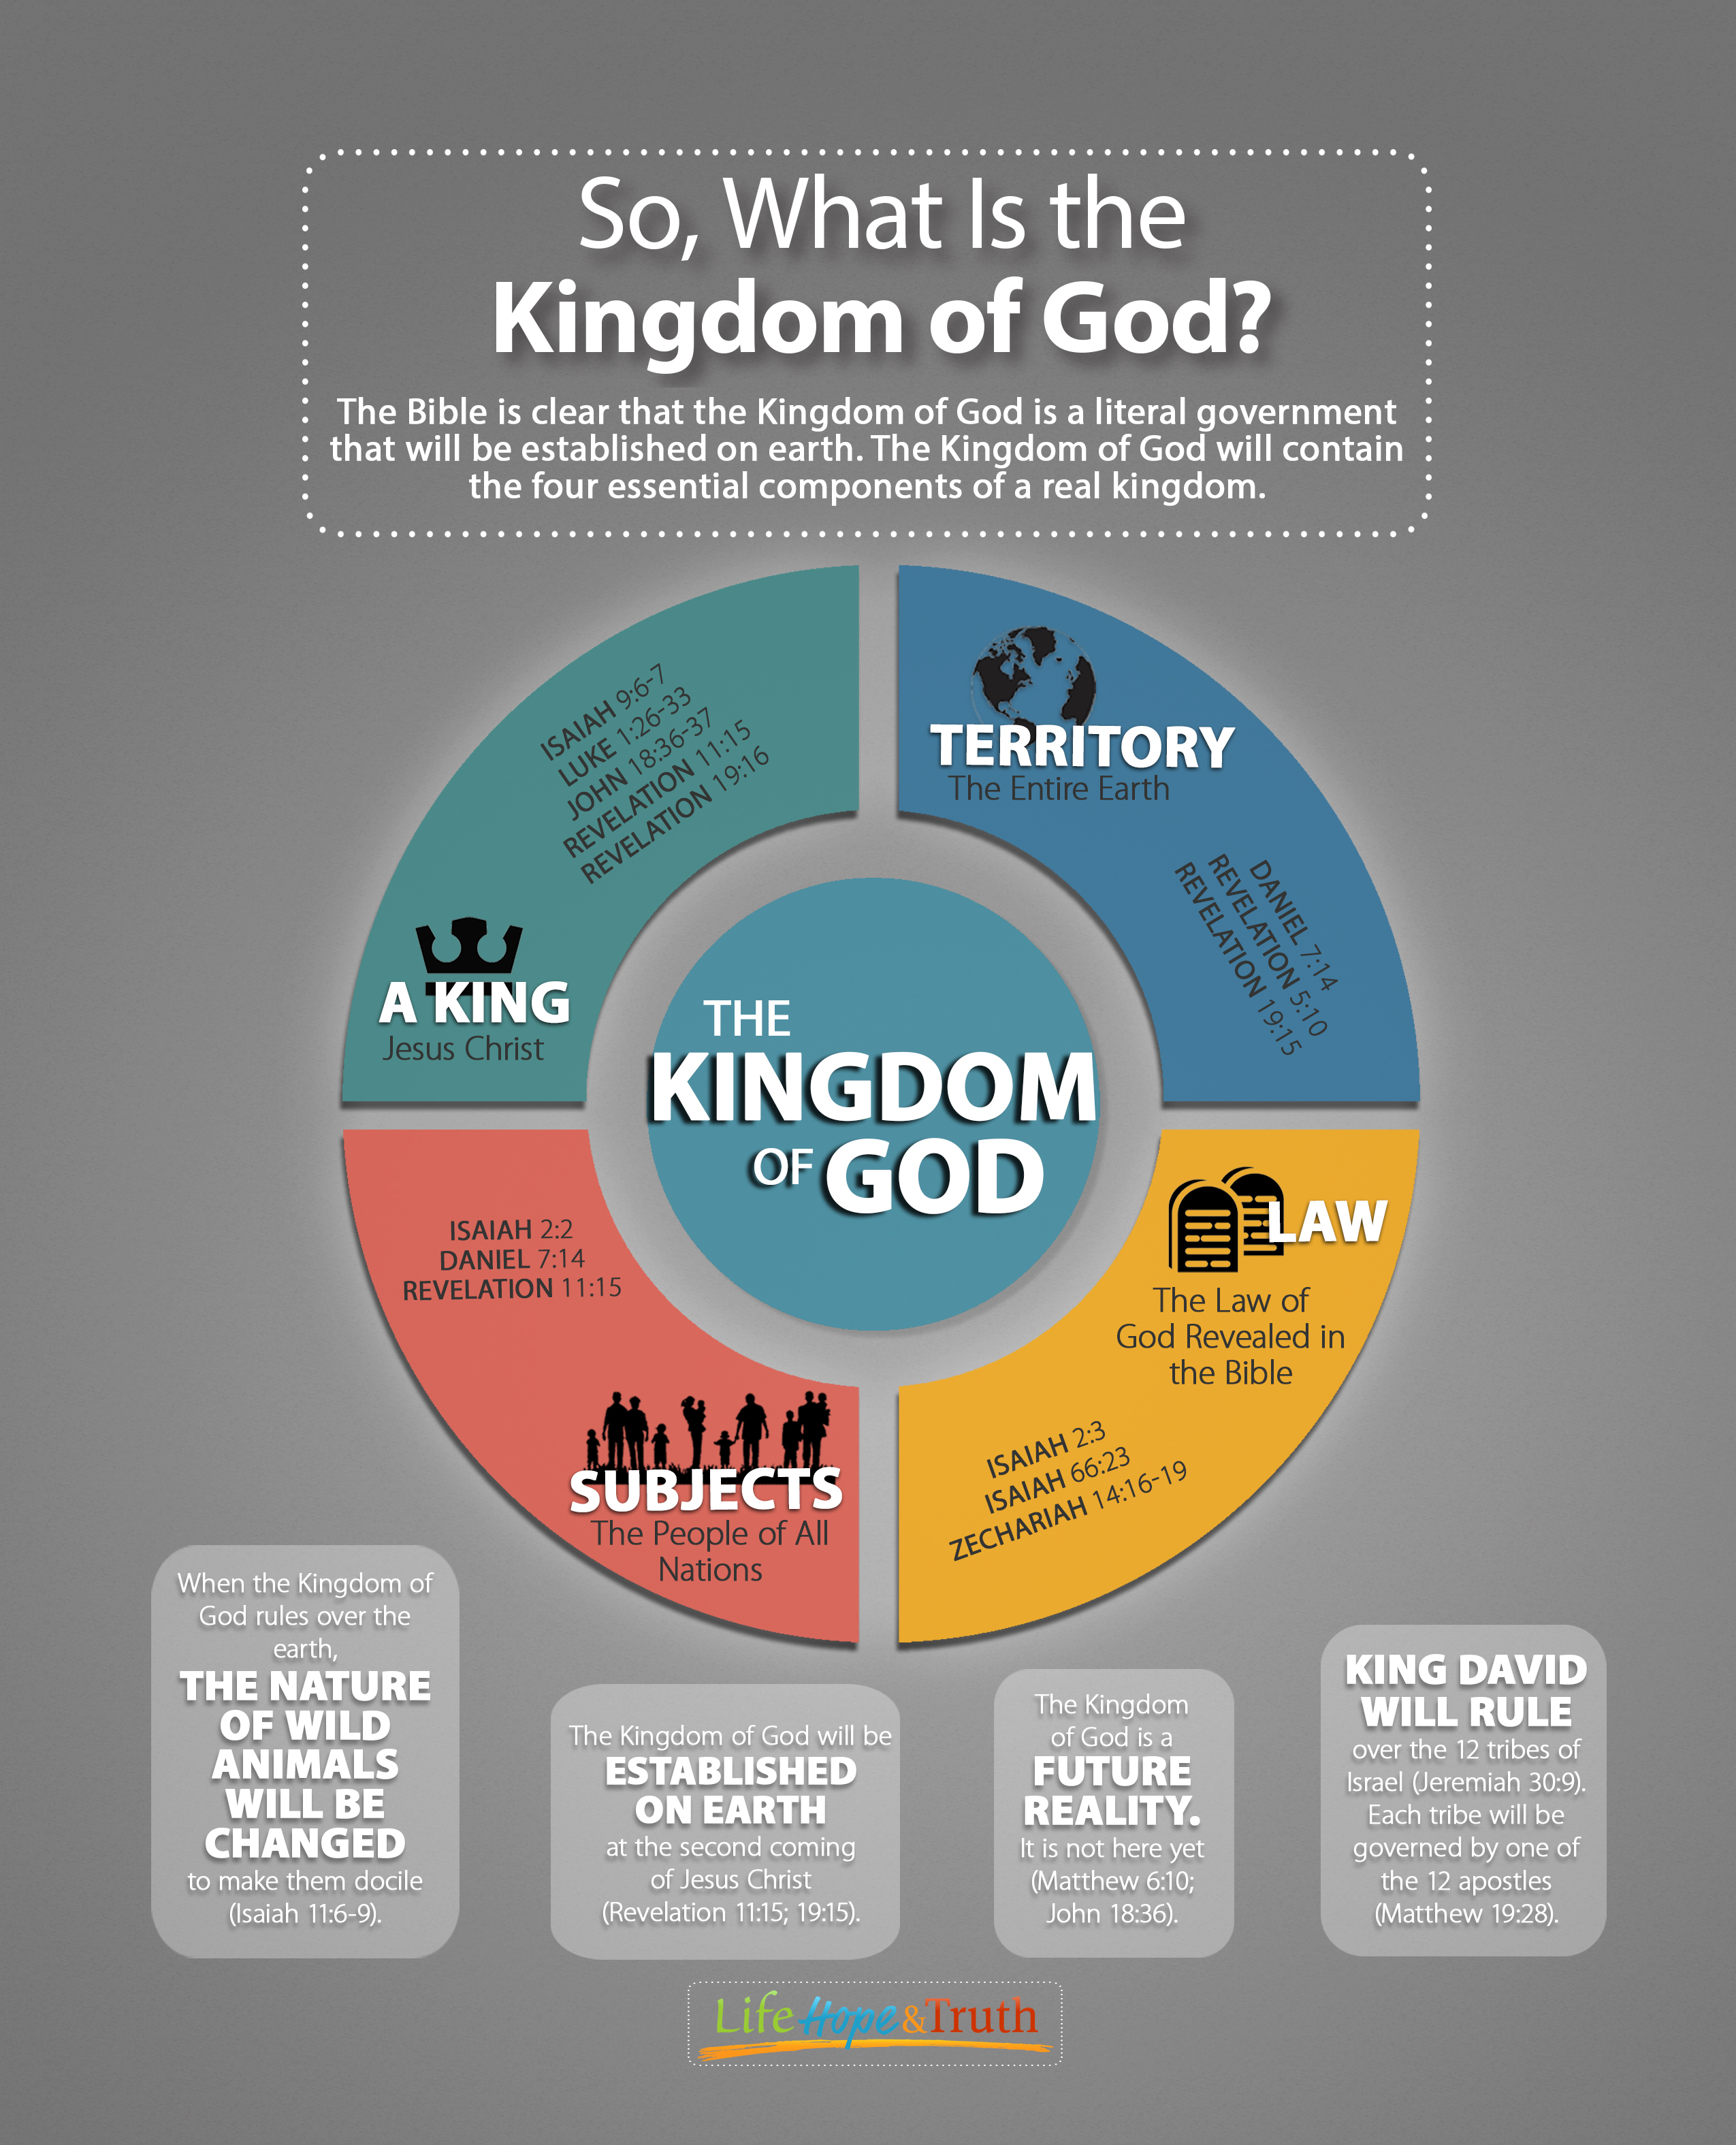 So, What Is the Kingdom of God?